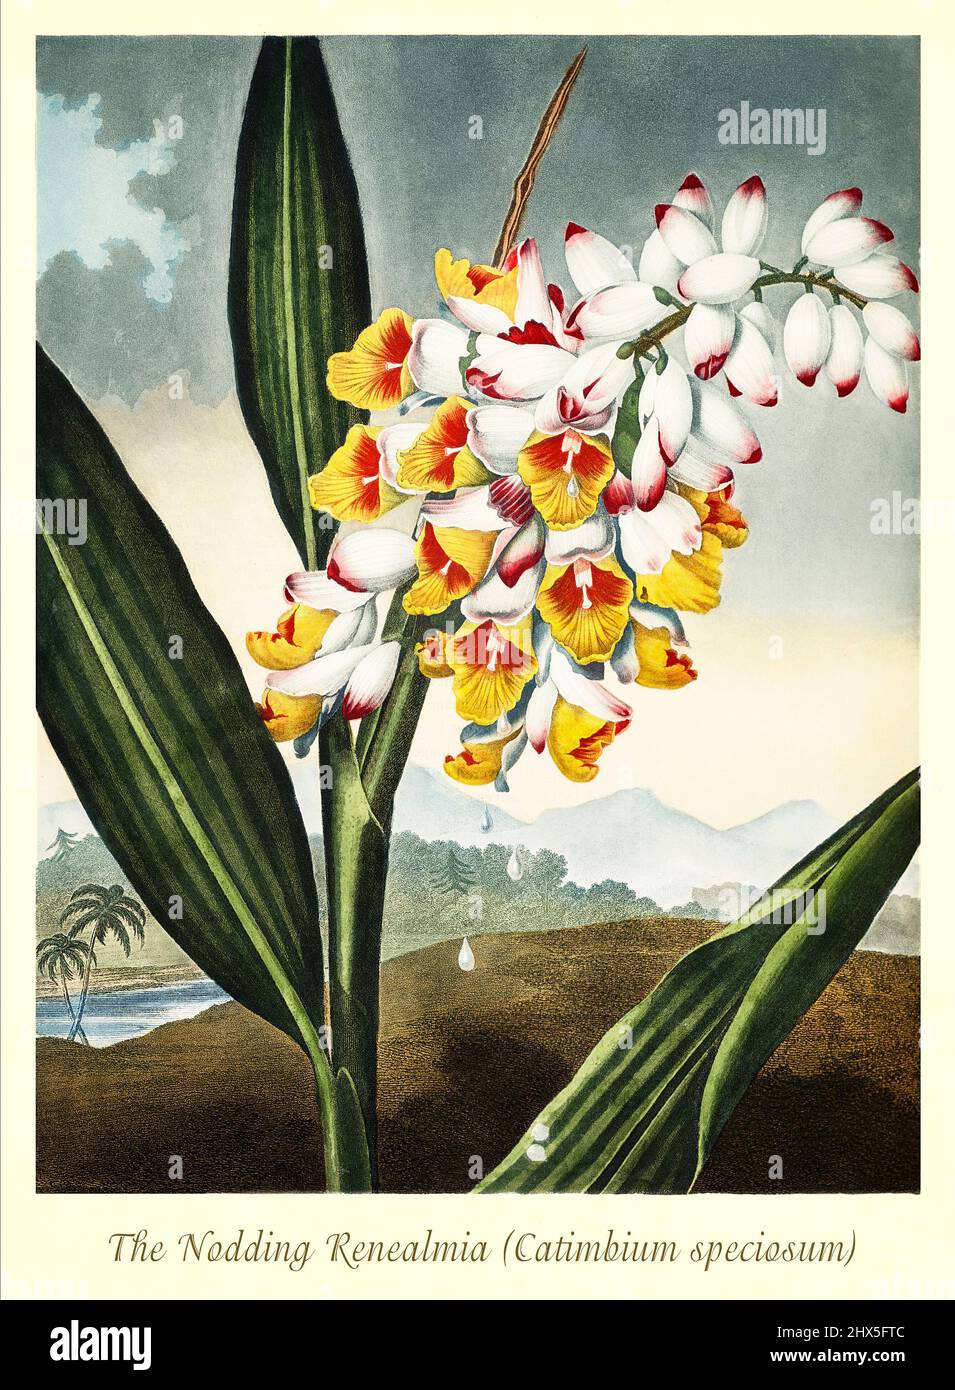 An early 19th century illustration of the Nodding Renealmia American or Catimbium speciosum. A native of China and Japan it rises by the banks of rivers to a height of near twenty feet and was introduced to the West about 1792 by Sir Joseph Banks.I t flowers in May and when first seen was immediately proclaimed for the beauty of its pink sweetly scented flowers. This artwork for Robert John Thornton's 'The Temple of Flora' in 1807, was printed, for the publisher, by T. Bensley, London, England. Stock Photo